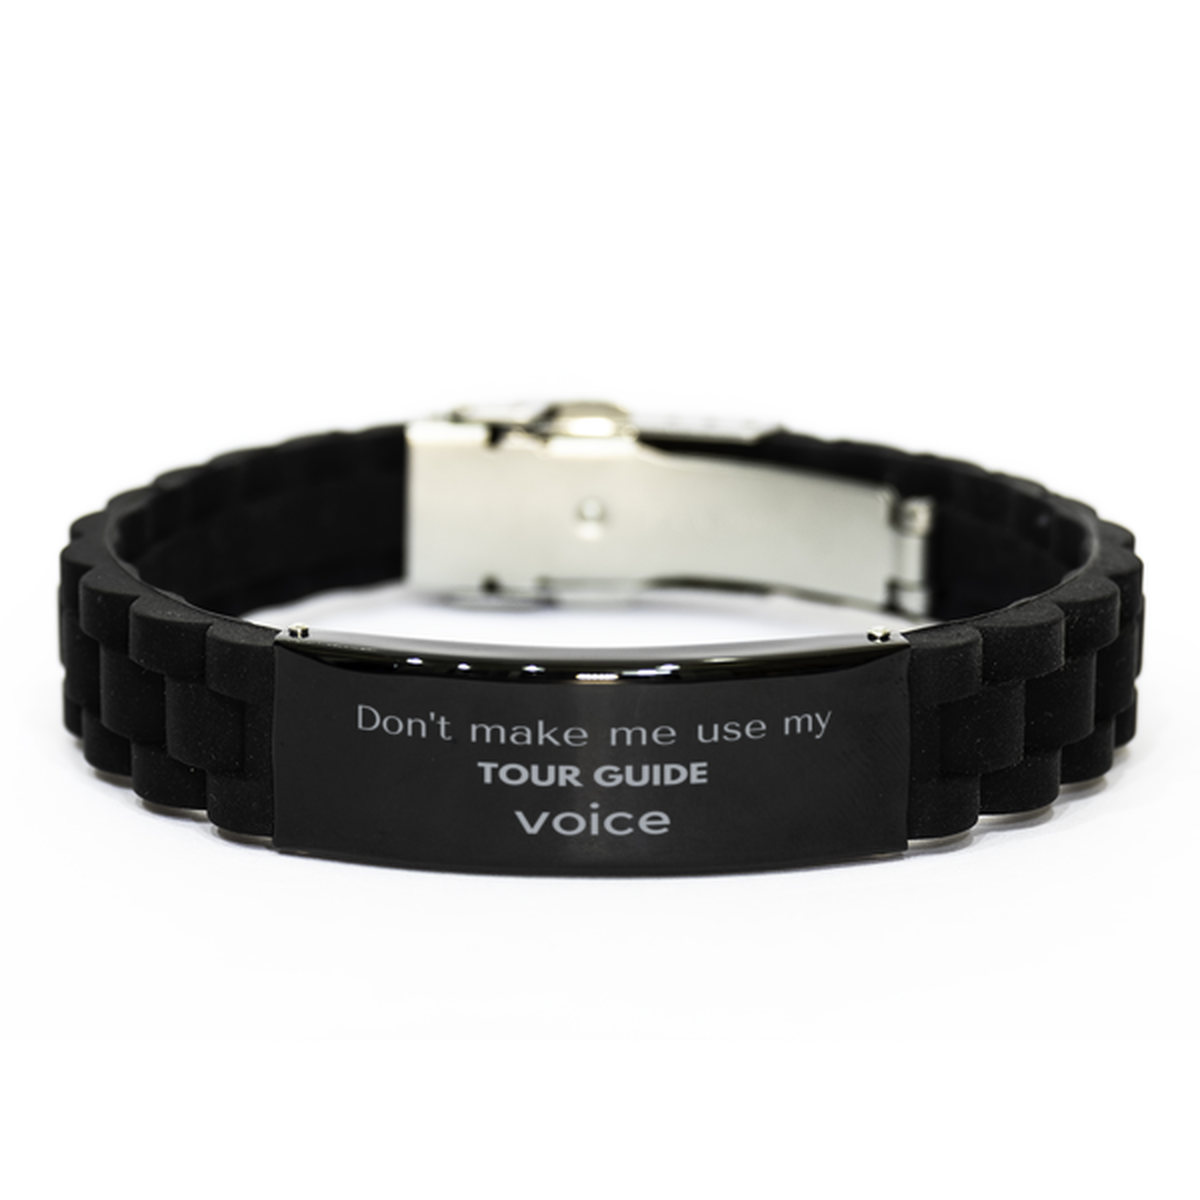 Don't make me use my Tour Guide voice, Sarcasm Tour Guide Gifts, Christmas Tour Guide Black Glidelock Clasp Bracelet Birthday Unique Gifts For Tour Guide Coworkers, Men, Women, Colleague, Friends